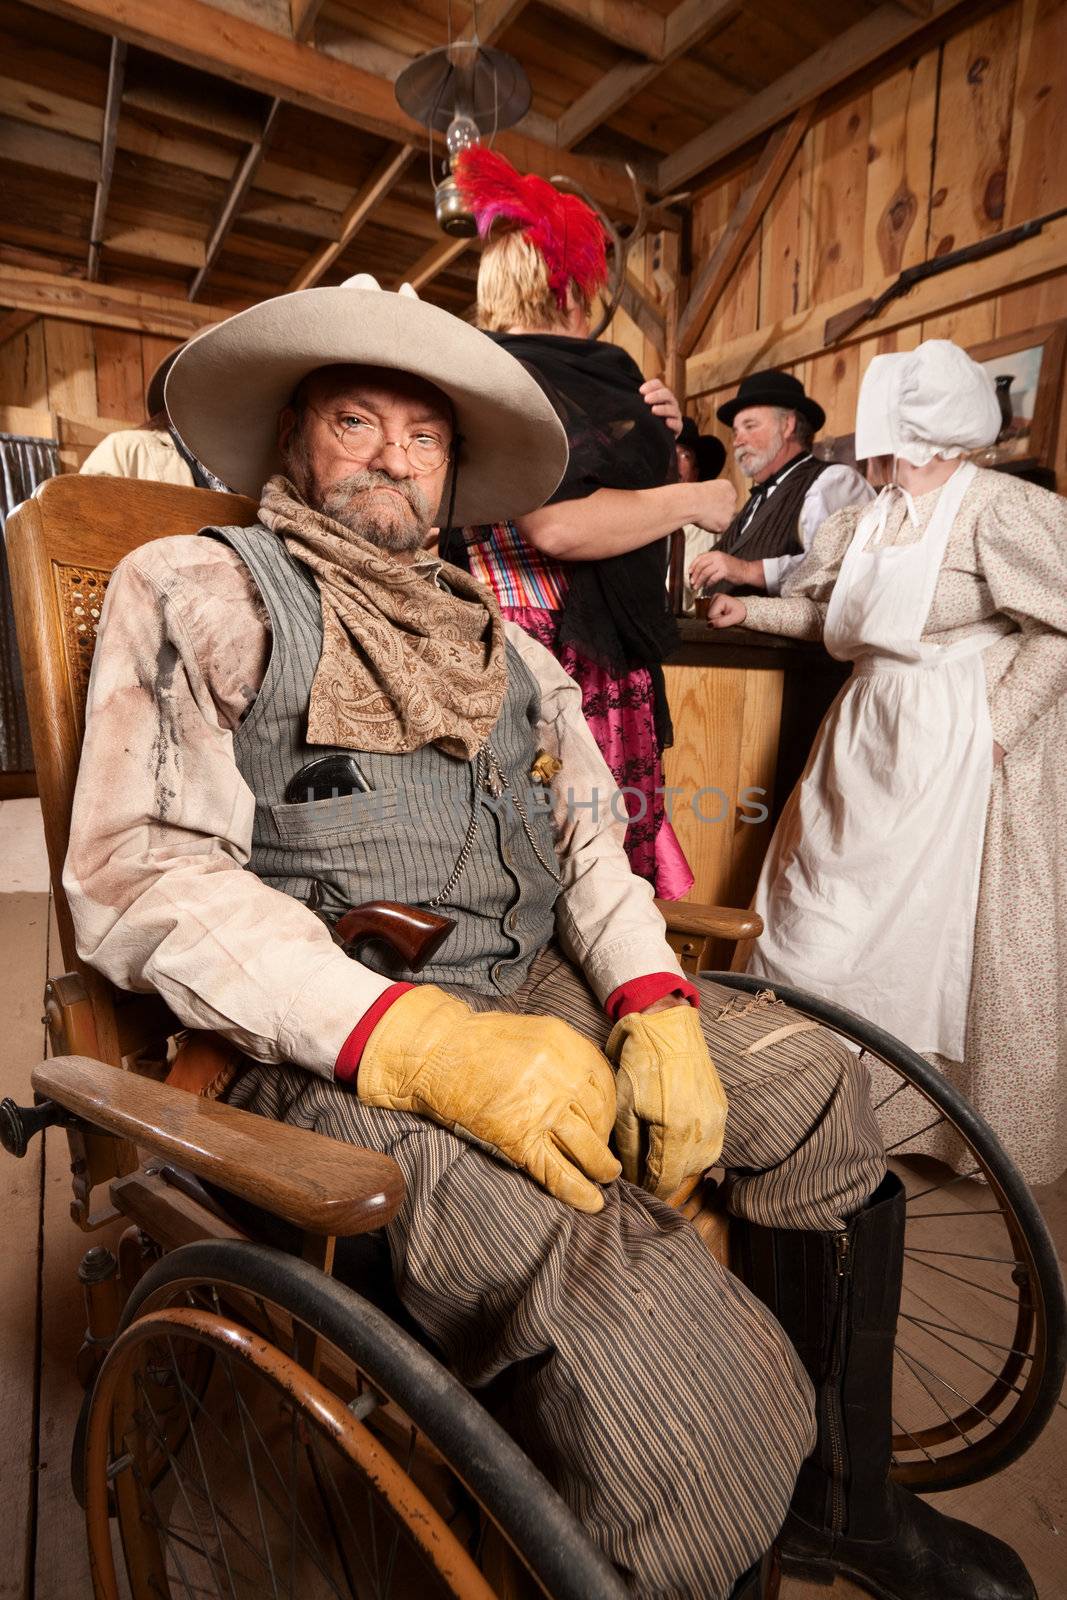 Injured mature cowboy in wheelchair at old west saloon